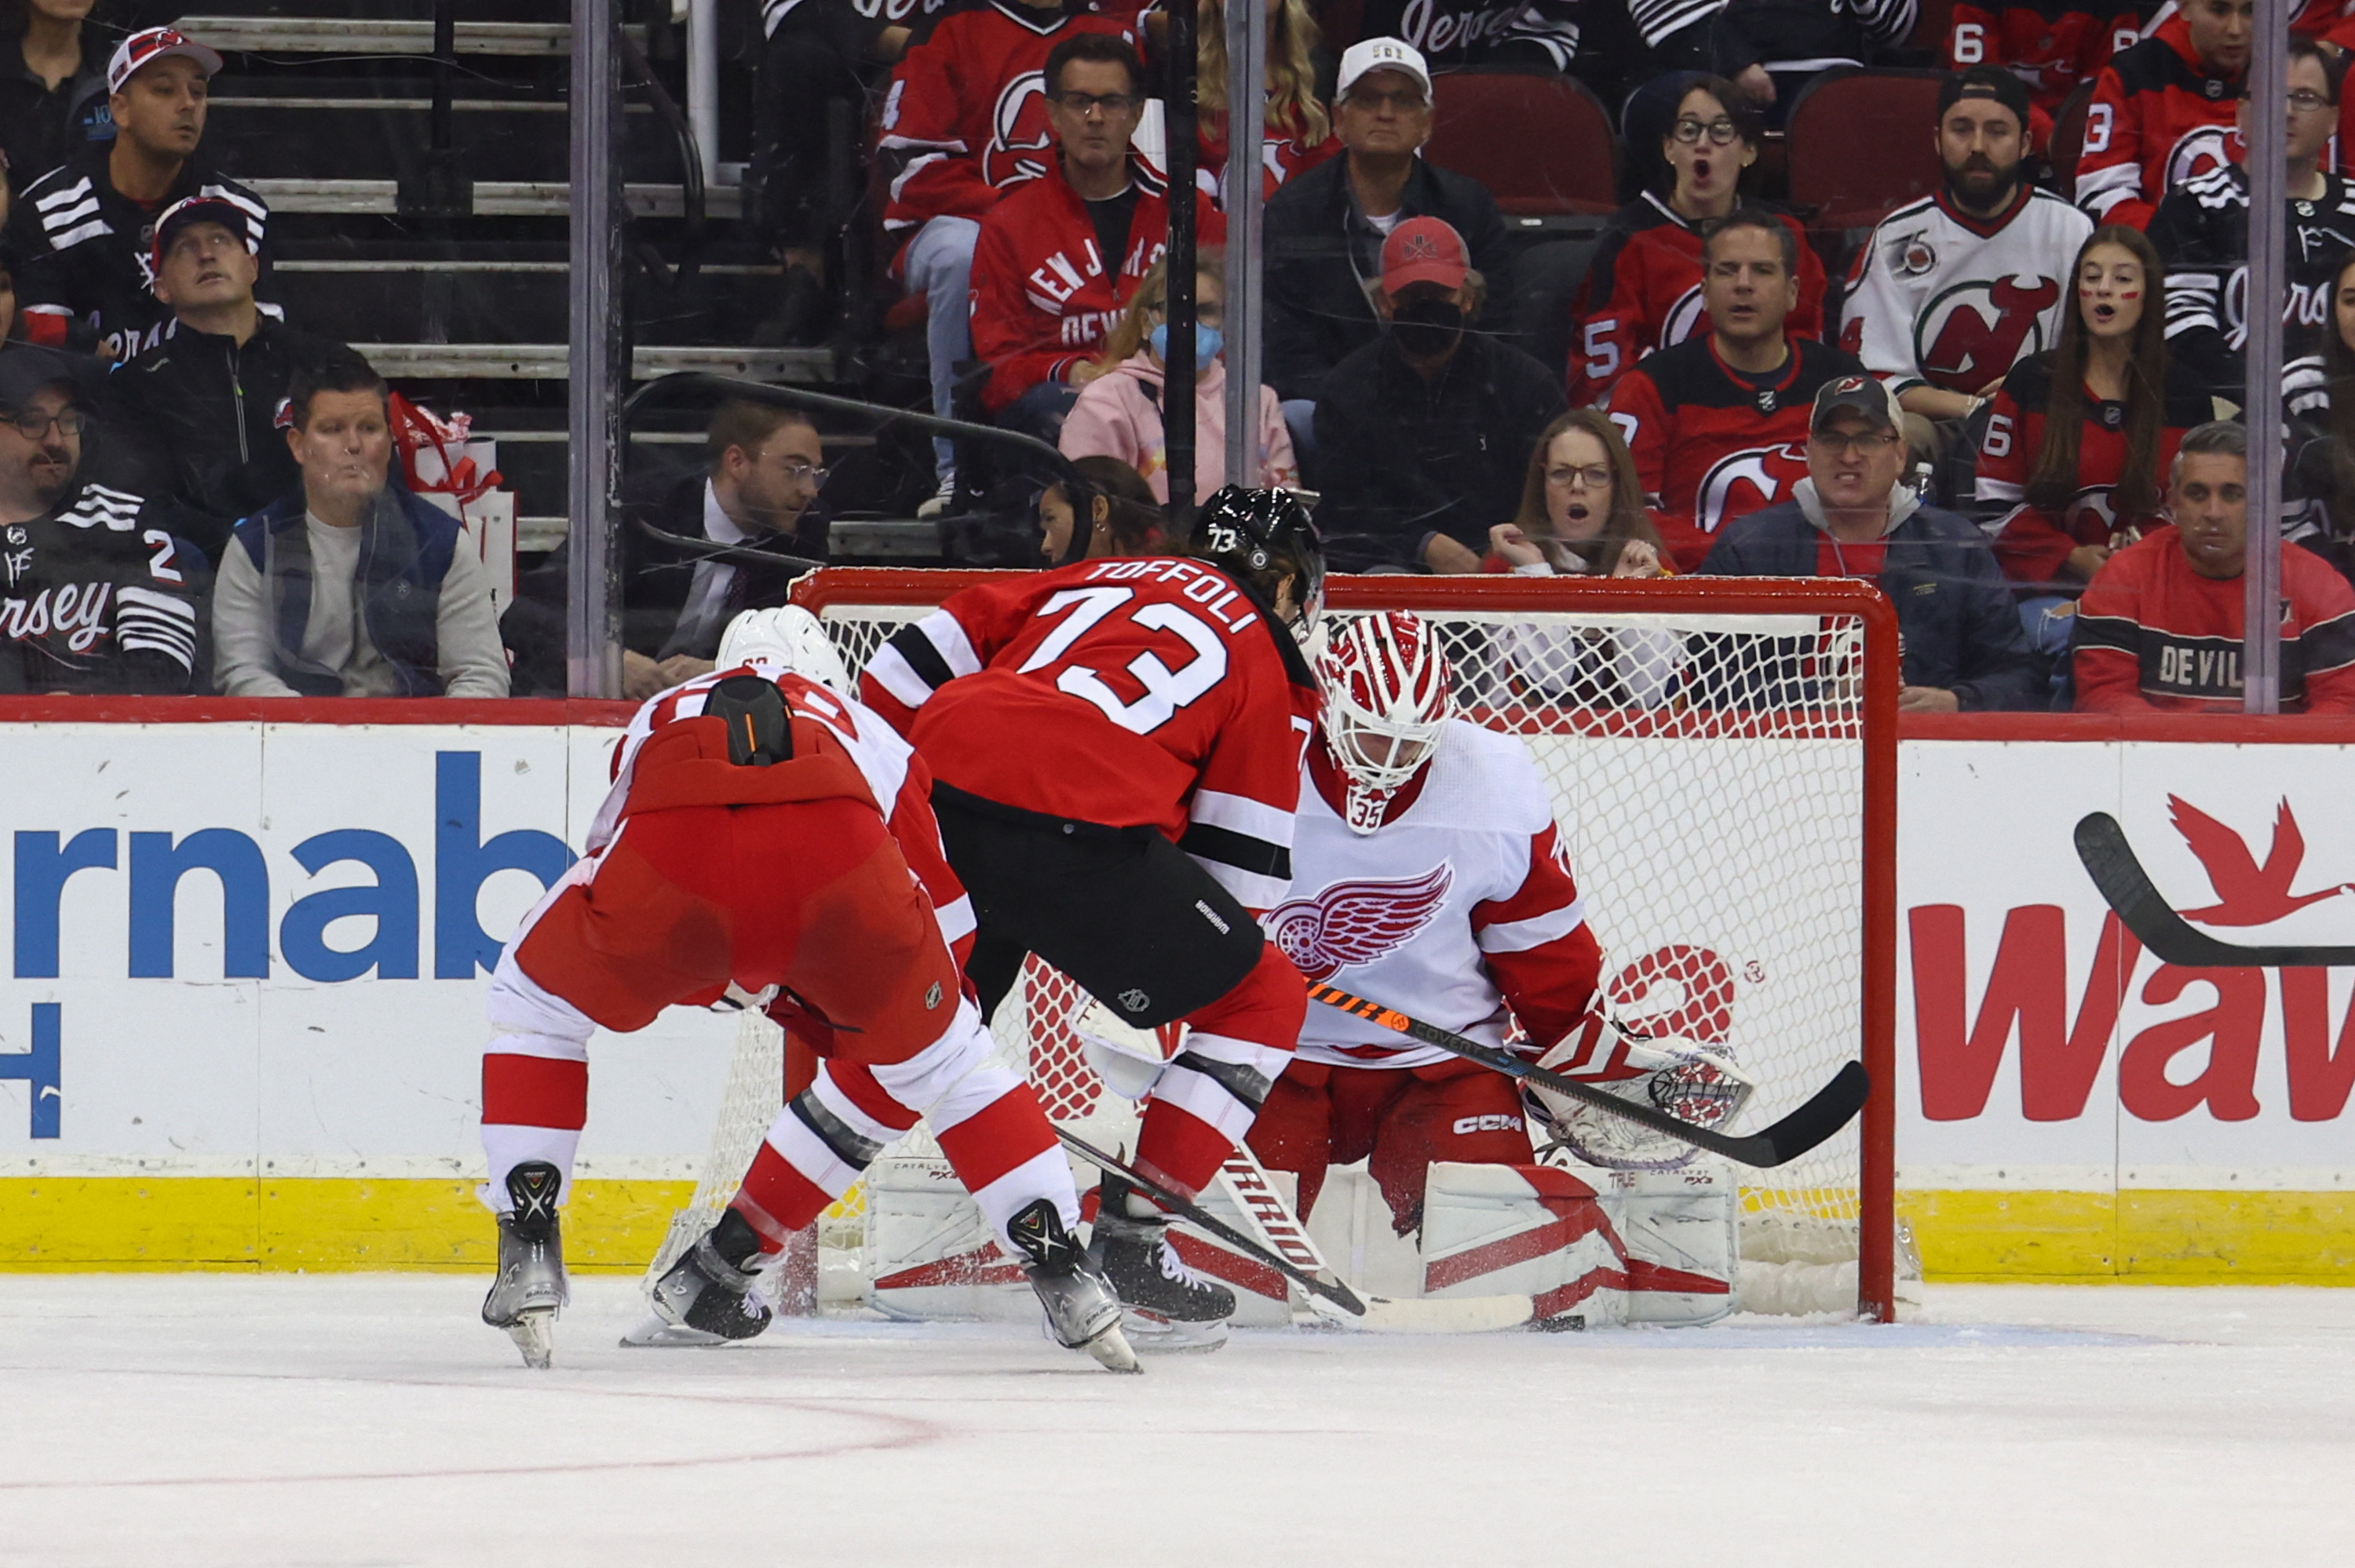 Jack Hughes tallies twice as Devils hold off Red Wings